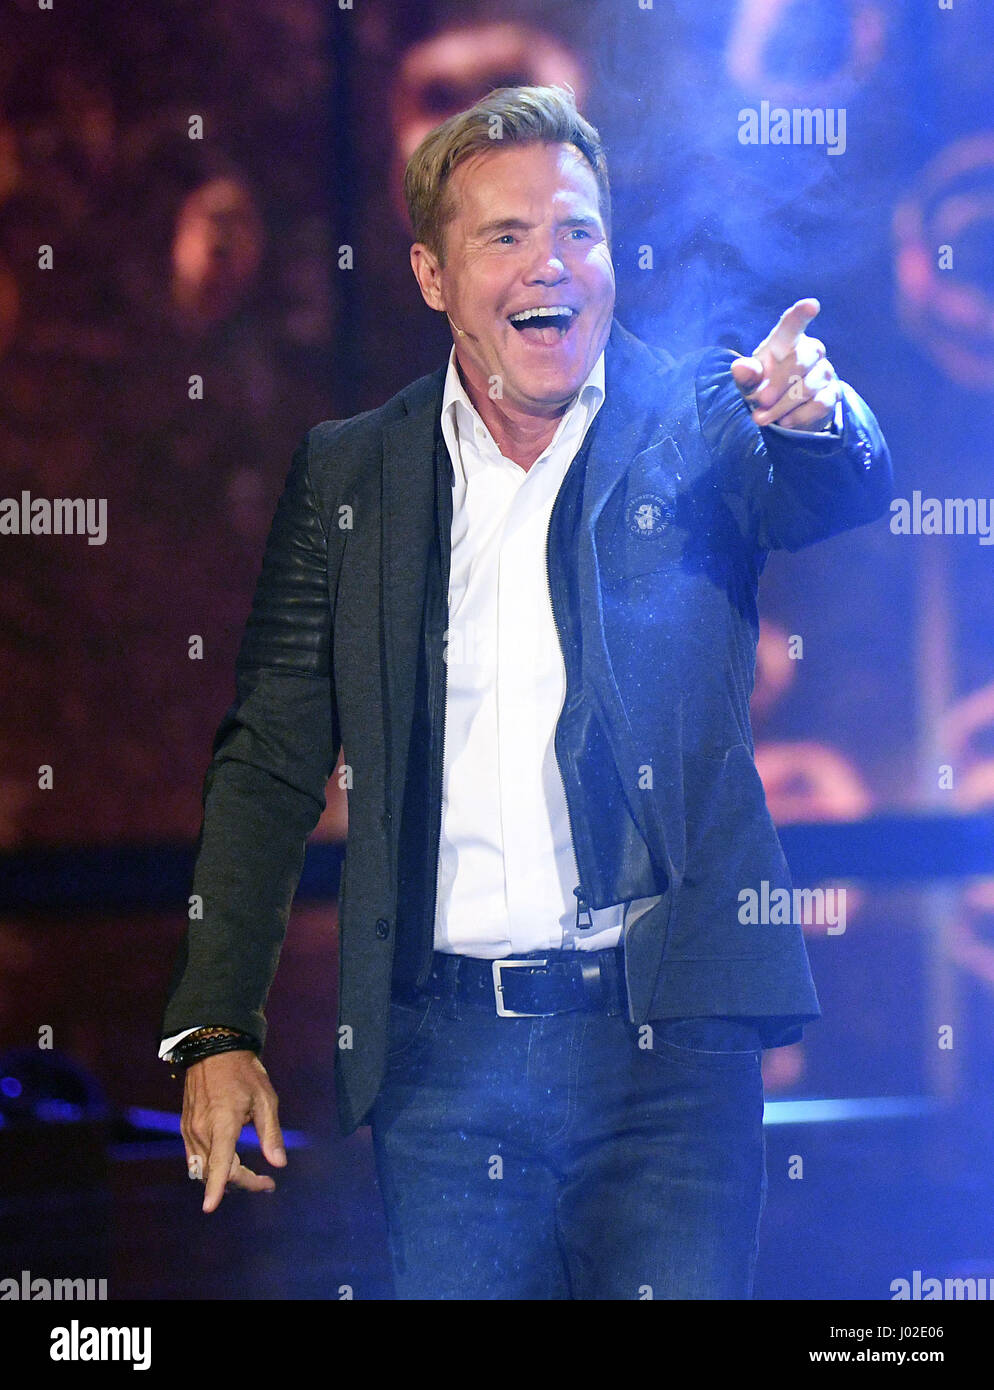 Cologne, Germany. 08th Apr, 2017. Judge Dieter Bohlen seen during the first live show of the 14th season of the talent show 'Deutschland sucht den Superstar' (lit. Germany is looking for the superstar) by television broadcaster RTL in Cologne, Germany, 08 April 2017. Photo: Henning Kaiser/dpa/Alamy Live News Stock Photo